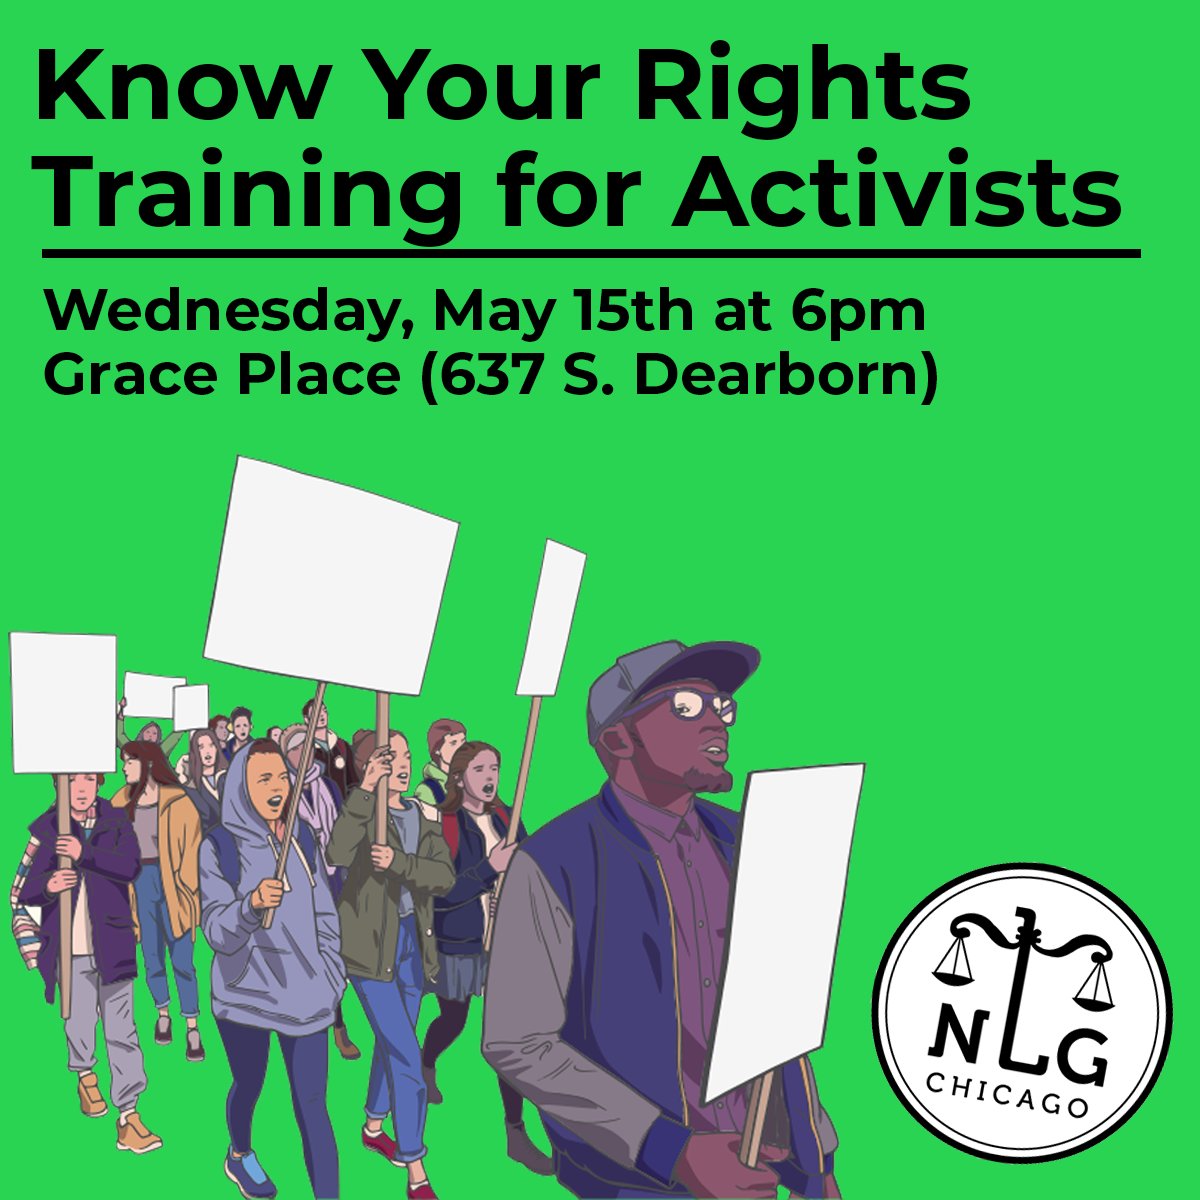 Whether your new to protesting or are a long time activist, it's always a good idea to be up on your rights. Join NLG Chicago for Know Your Rights training for activists on May 15th at 6pm at Grace Place. Register here: forms.gle/UbVFJKB62Sfdox…